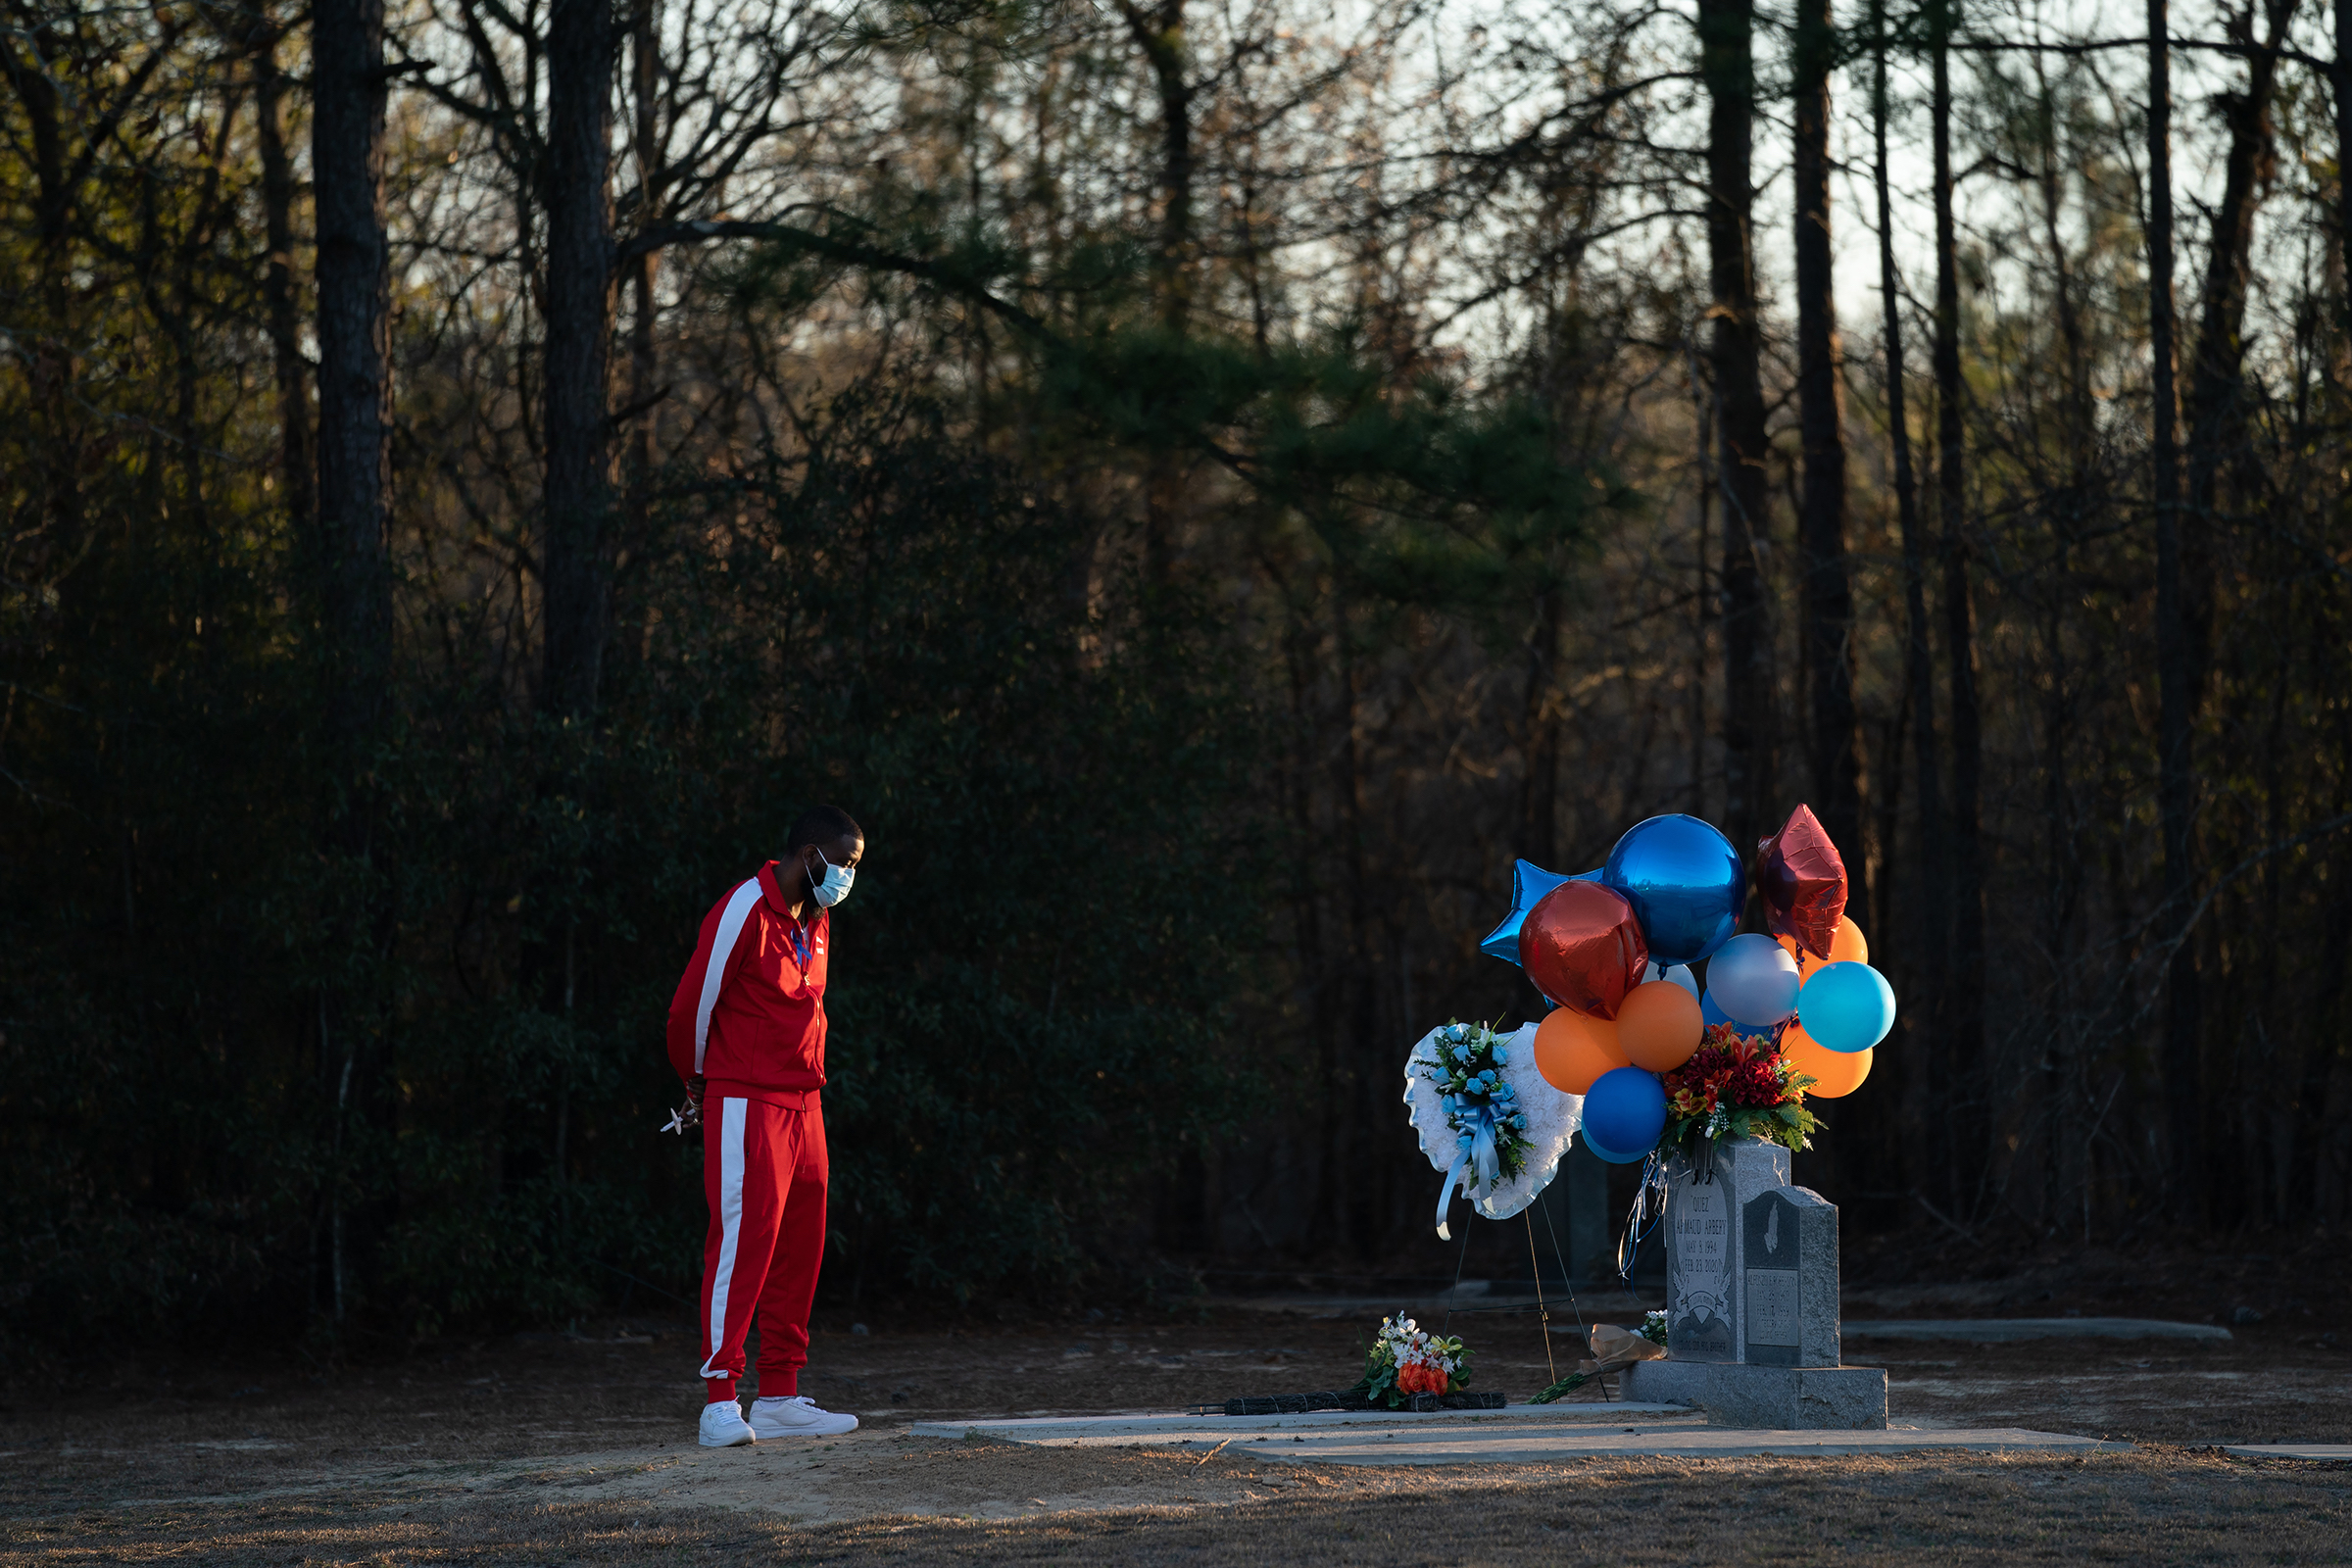 A visitor takes a moment at the gravesite of Ahmaud Arbery in Waynesboro, Ga., on Feb. 23. Arbery, a Black man, was shot and killed while jogging near Brunswick, Ga., a year ago earlier after being chased by white men.